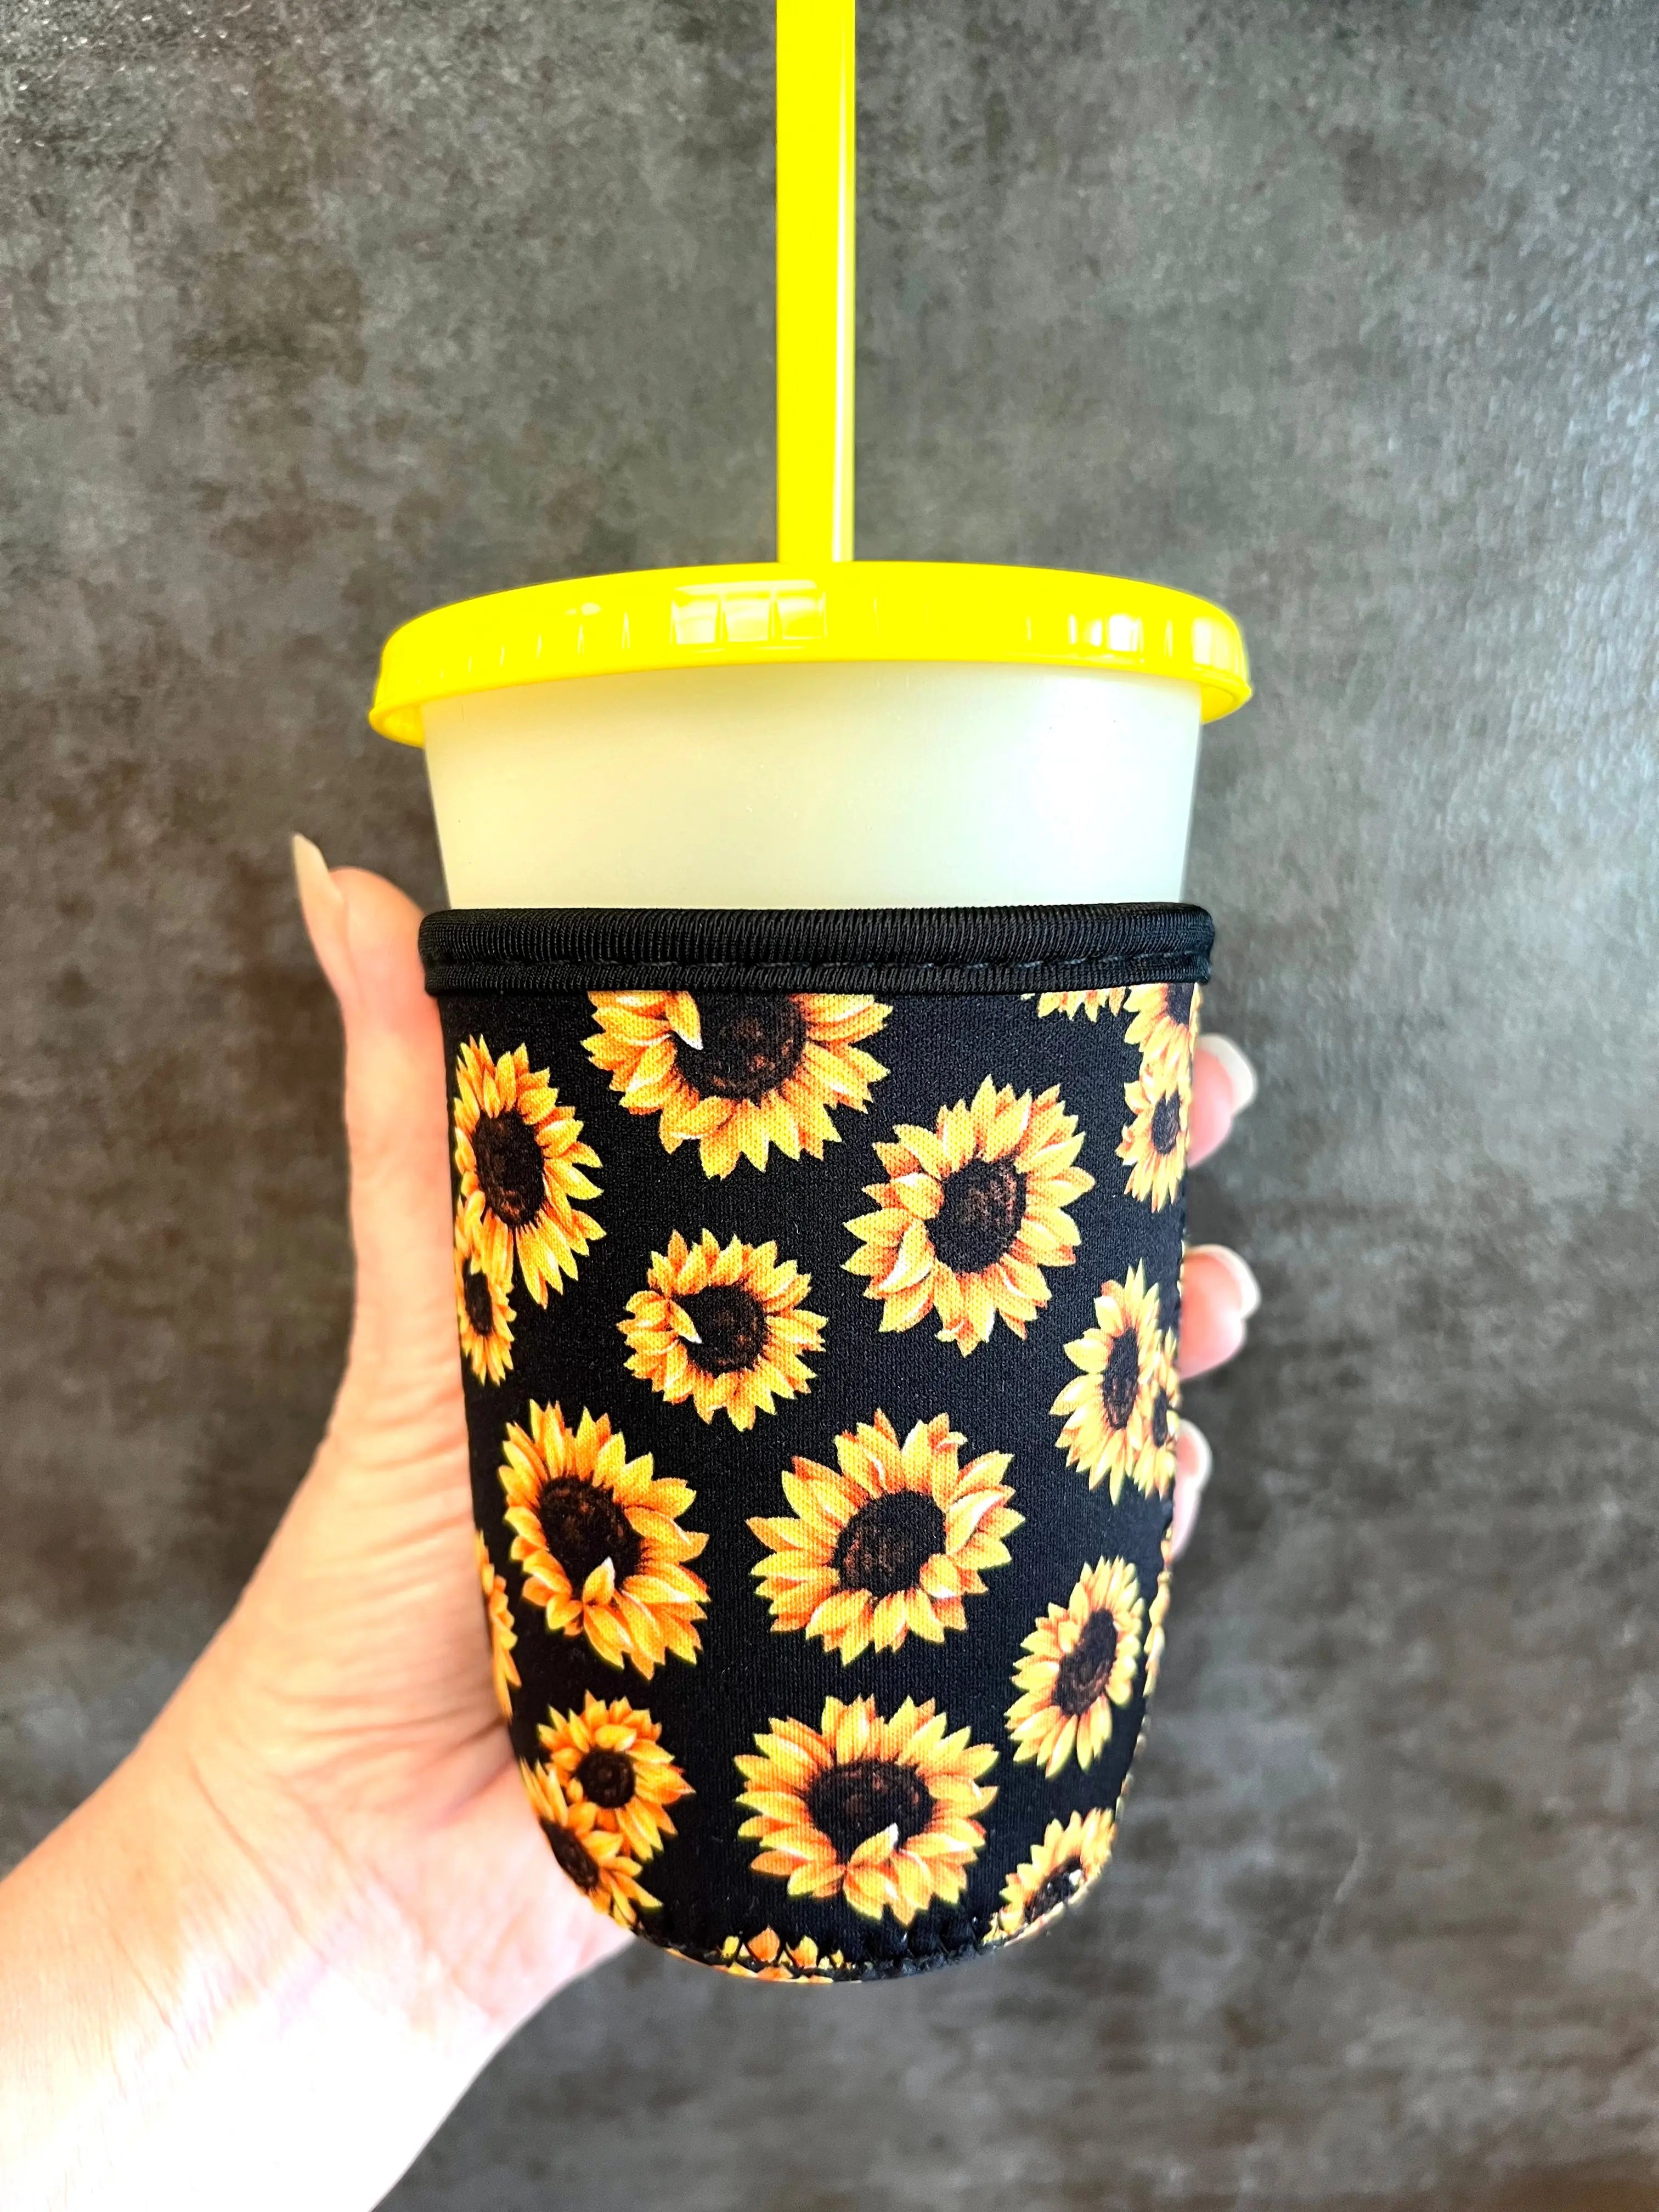 https://cdn.shopify.com/s/files/1/1826/7909/products/16-OZ-Black-Sunflower-Cup-Cover-Kim-s-Korner-Wholesale-1681587250.heic?v=1690064230